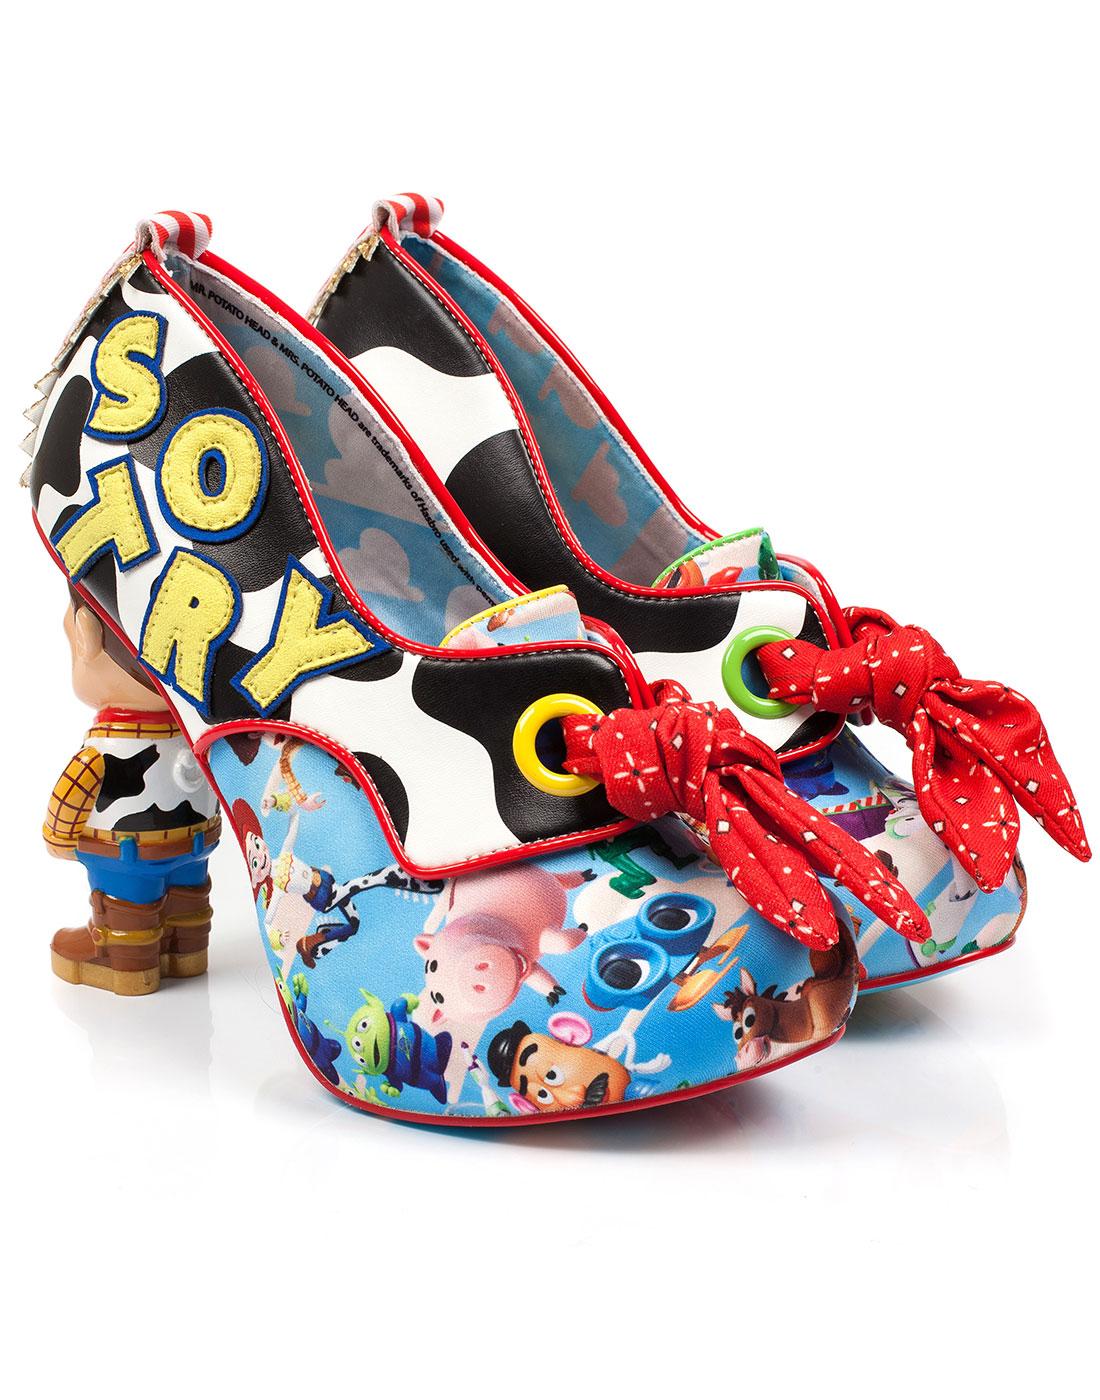 Irregular Choice opens in Manchester with quirky heels and Disney